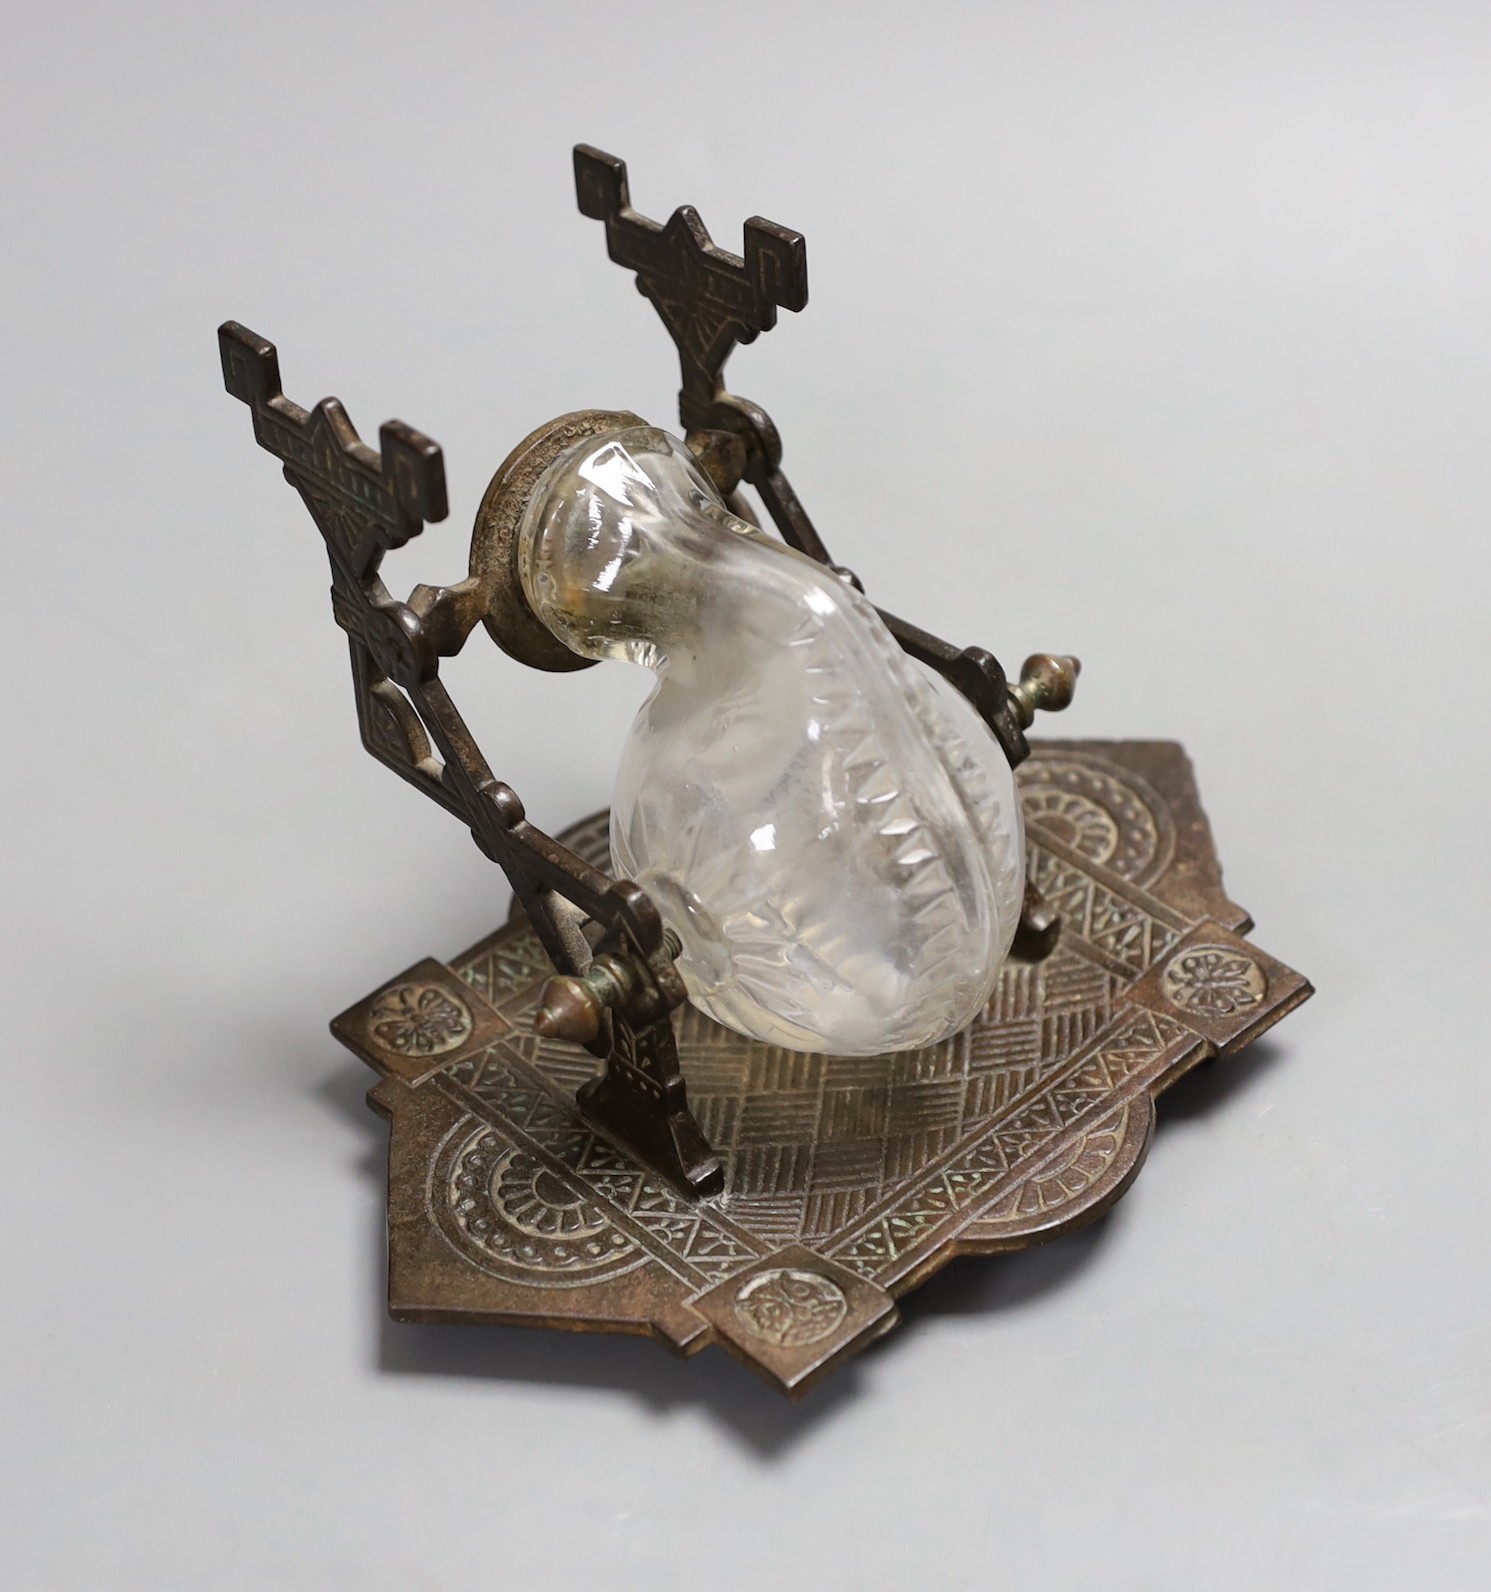 A Victorian patent inkstand embossed with embossed owl and butterfly motifs, attributed to Thomas Jeckyll, 11cm tall